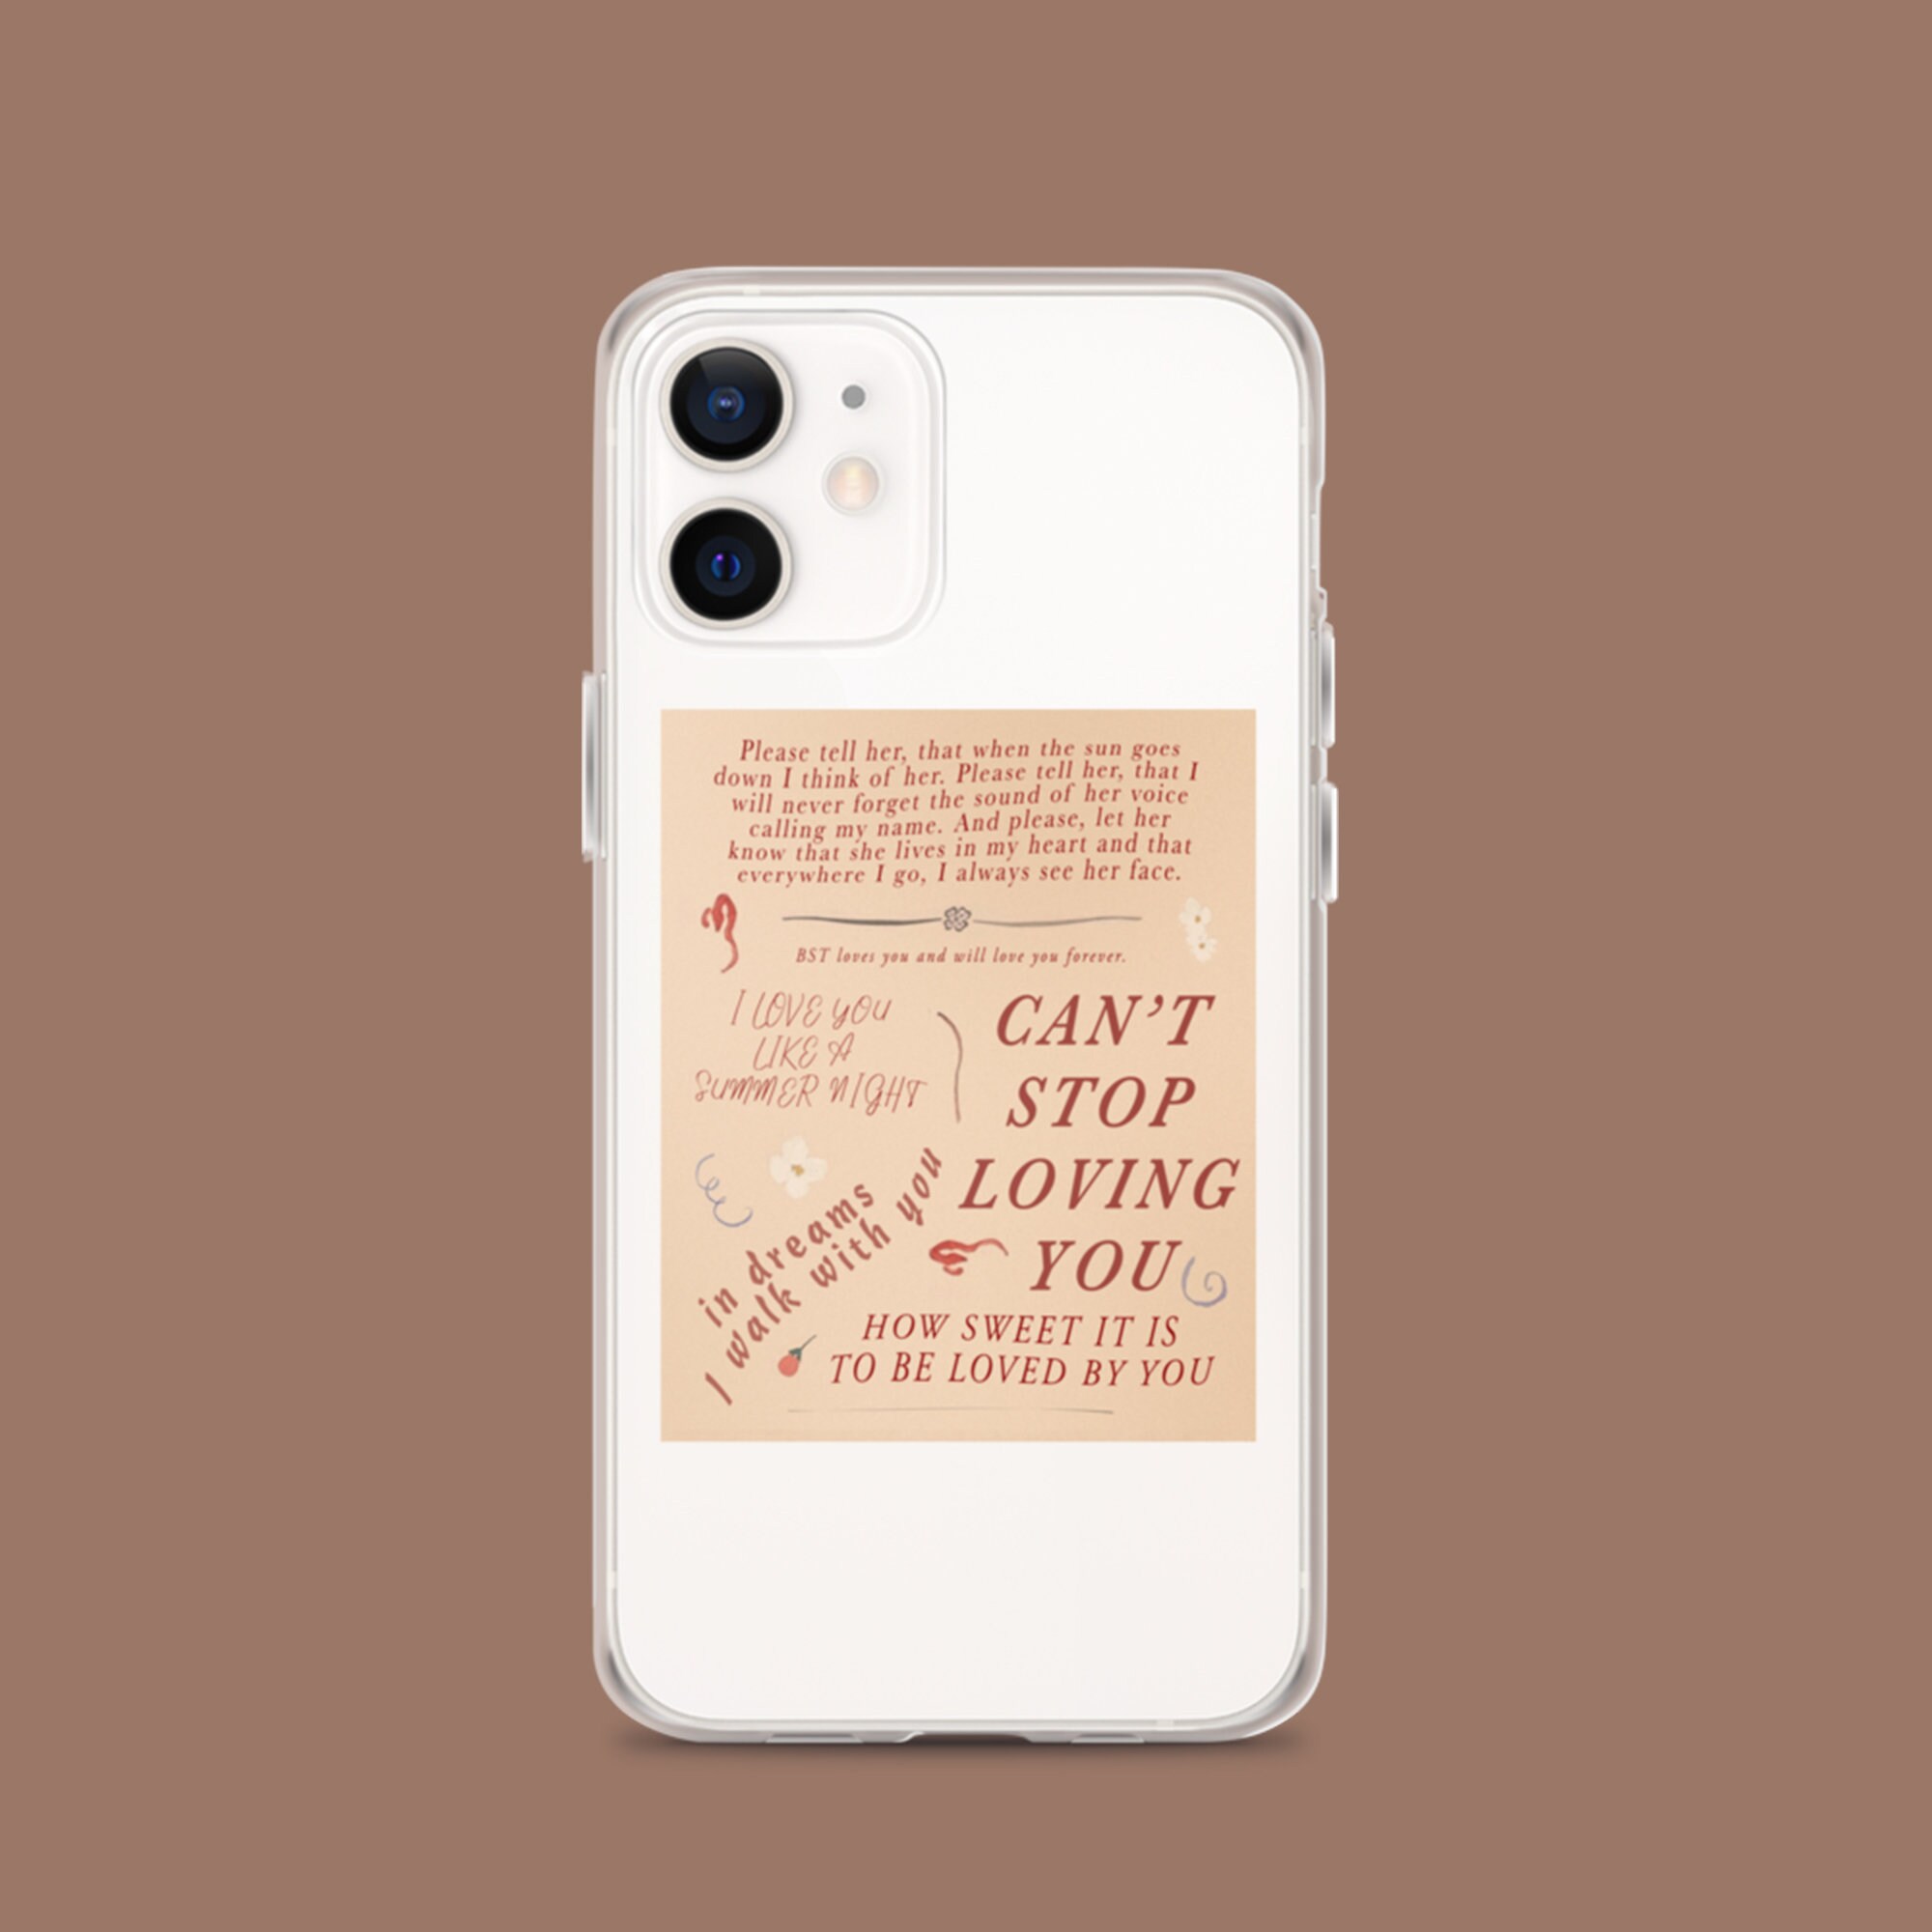 You know My Heart iPhone Case